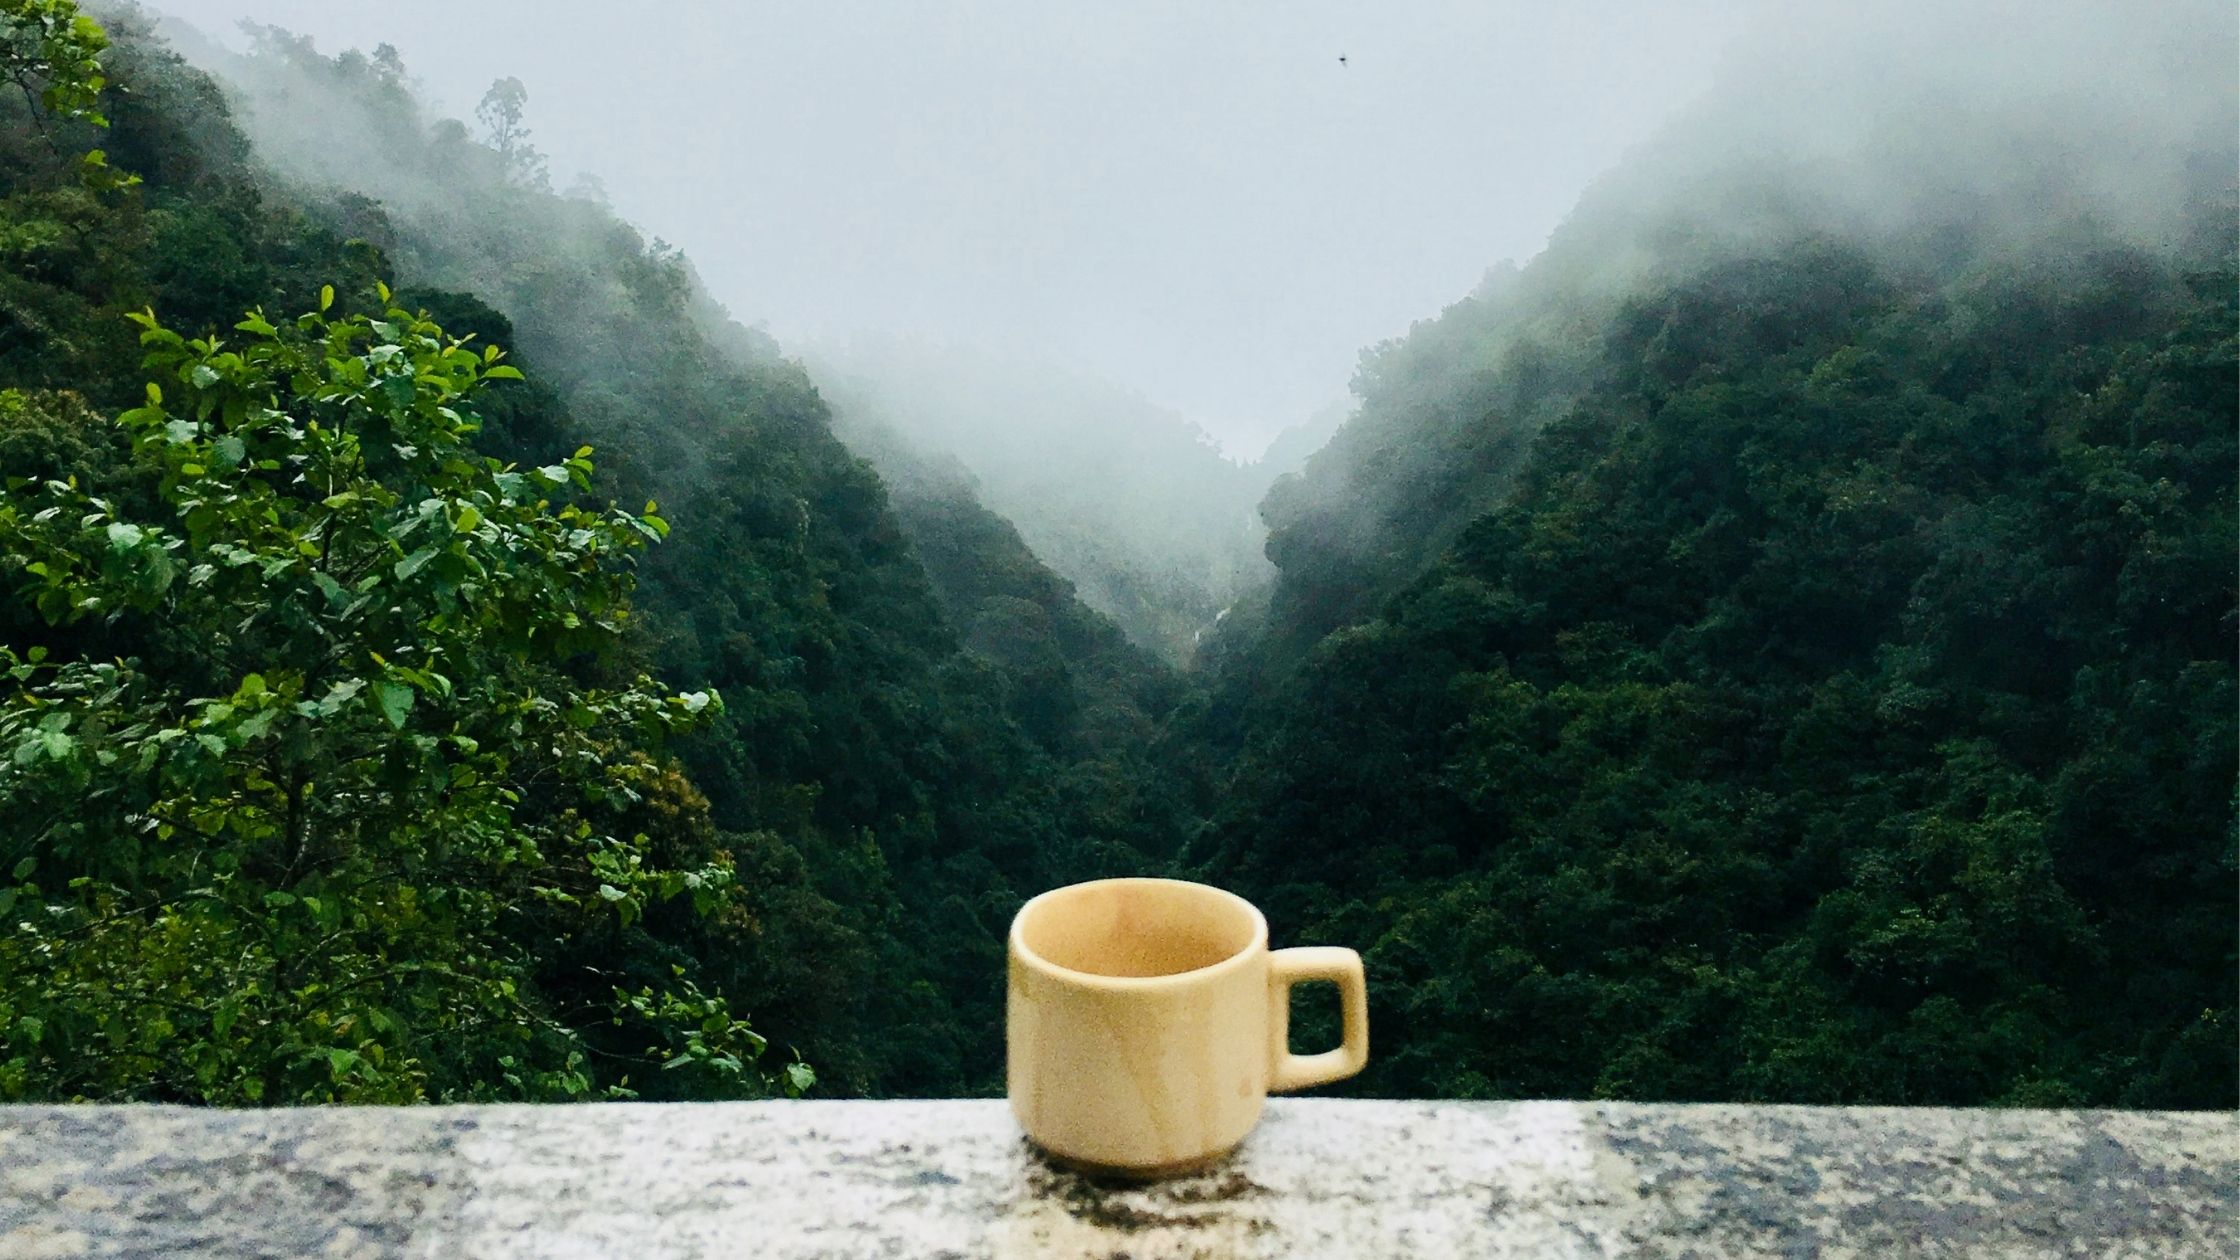 A picture of a coffee mug overlooking into the woods.